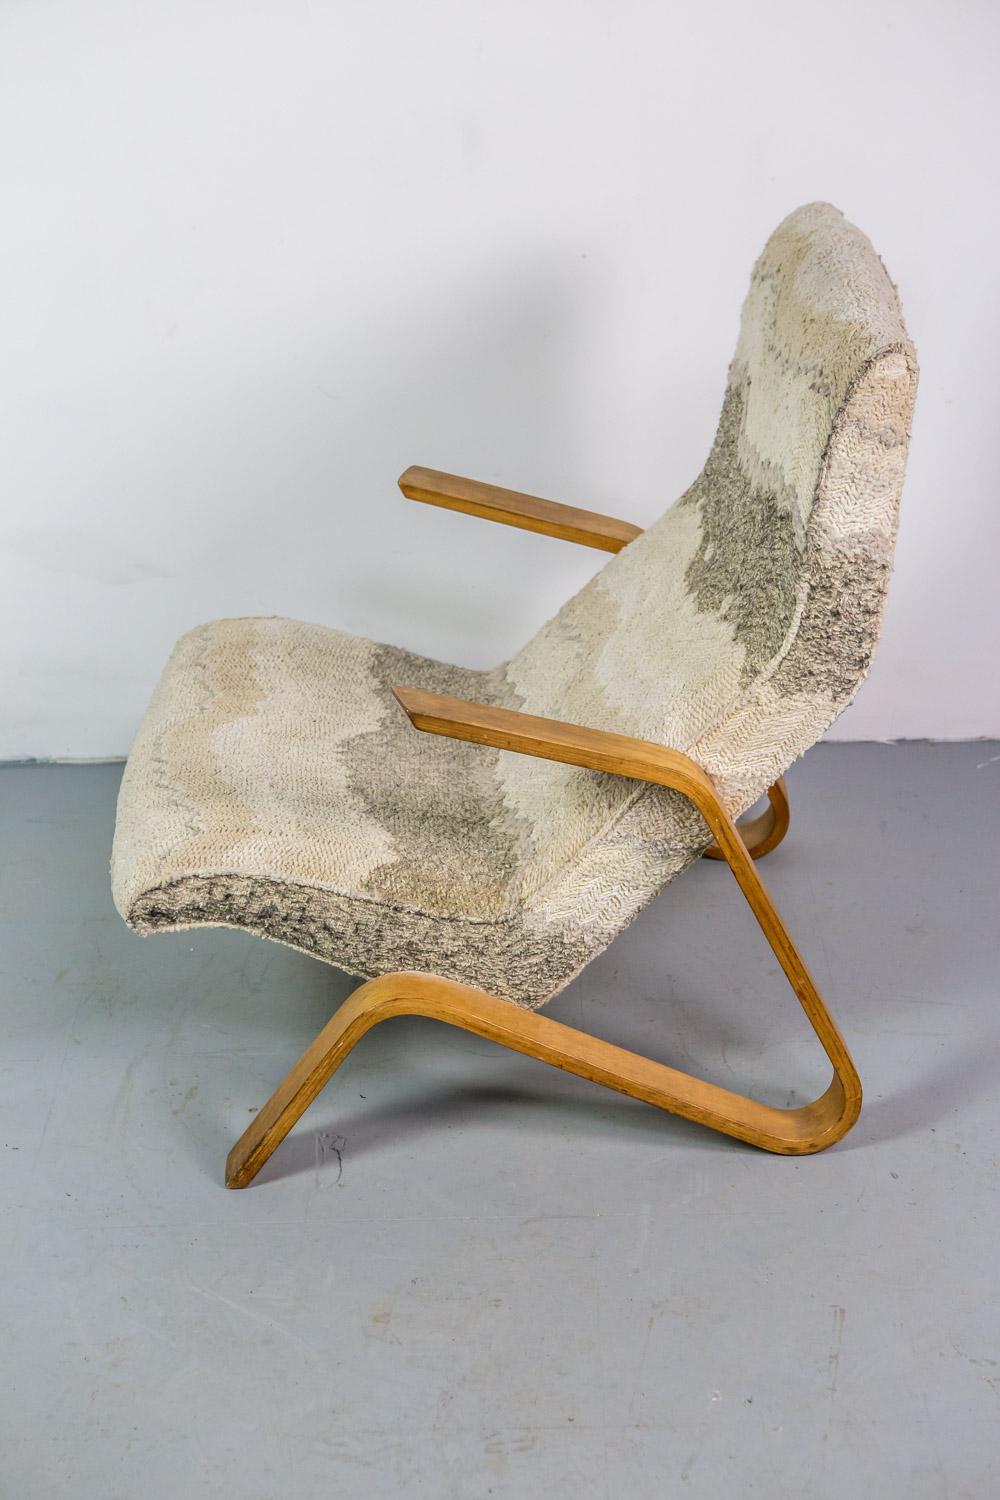 Bentwood Early Grasshopper Chair by Eero Saarinen for Knoll